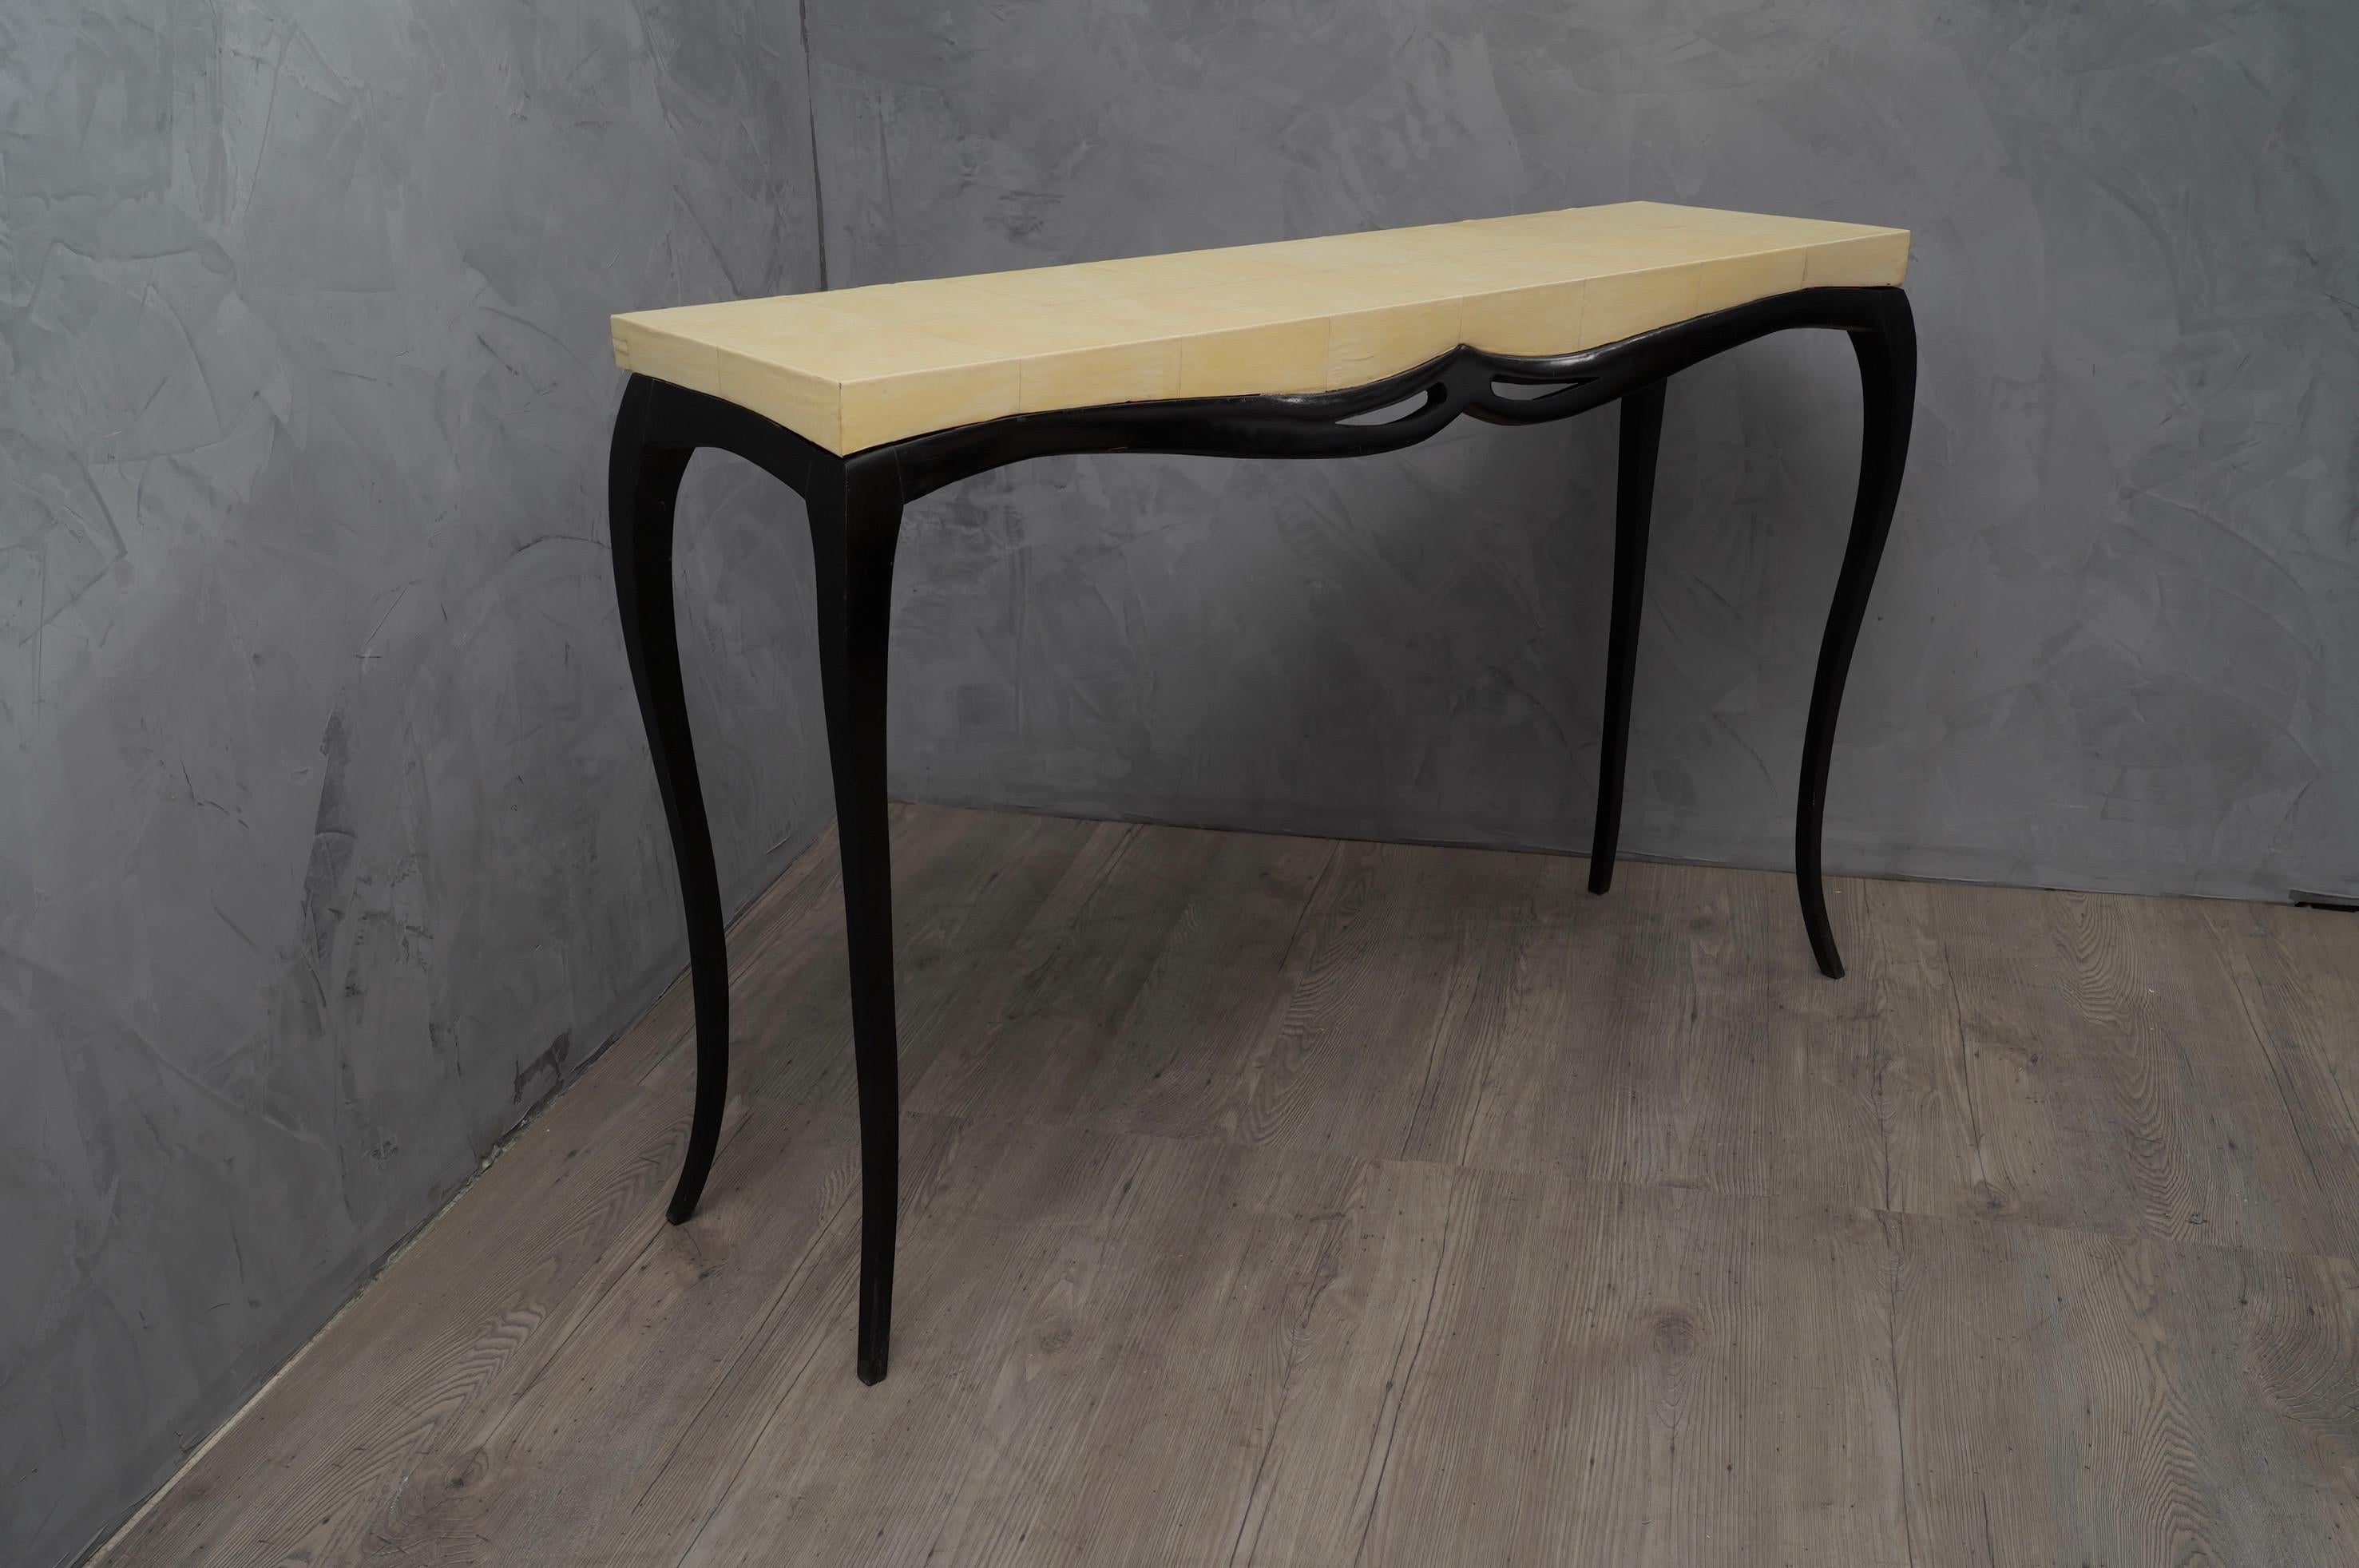 Very rich in movements, this console is unique in its kind also for the precious material with which it is coated.

The console is made up of a wooden top covered in goatskin, where the leather also covers the part of the side edge; The top rests